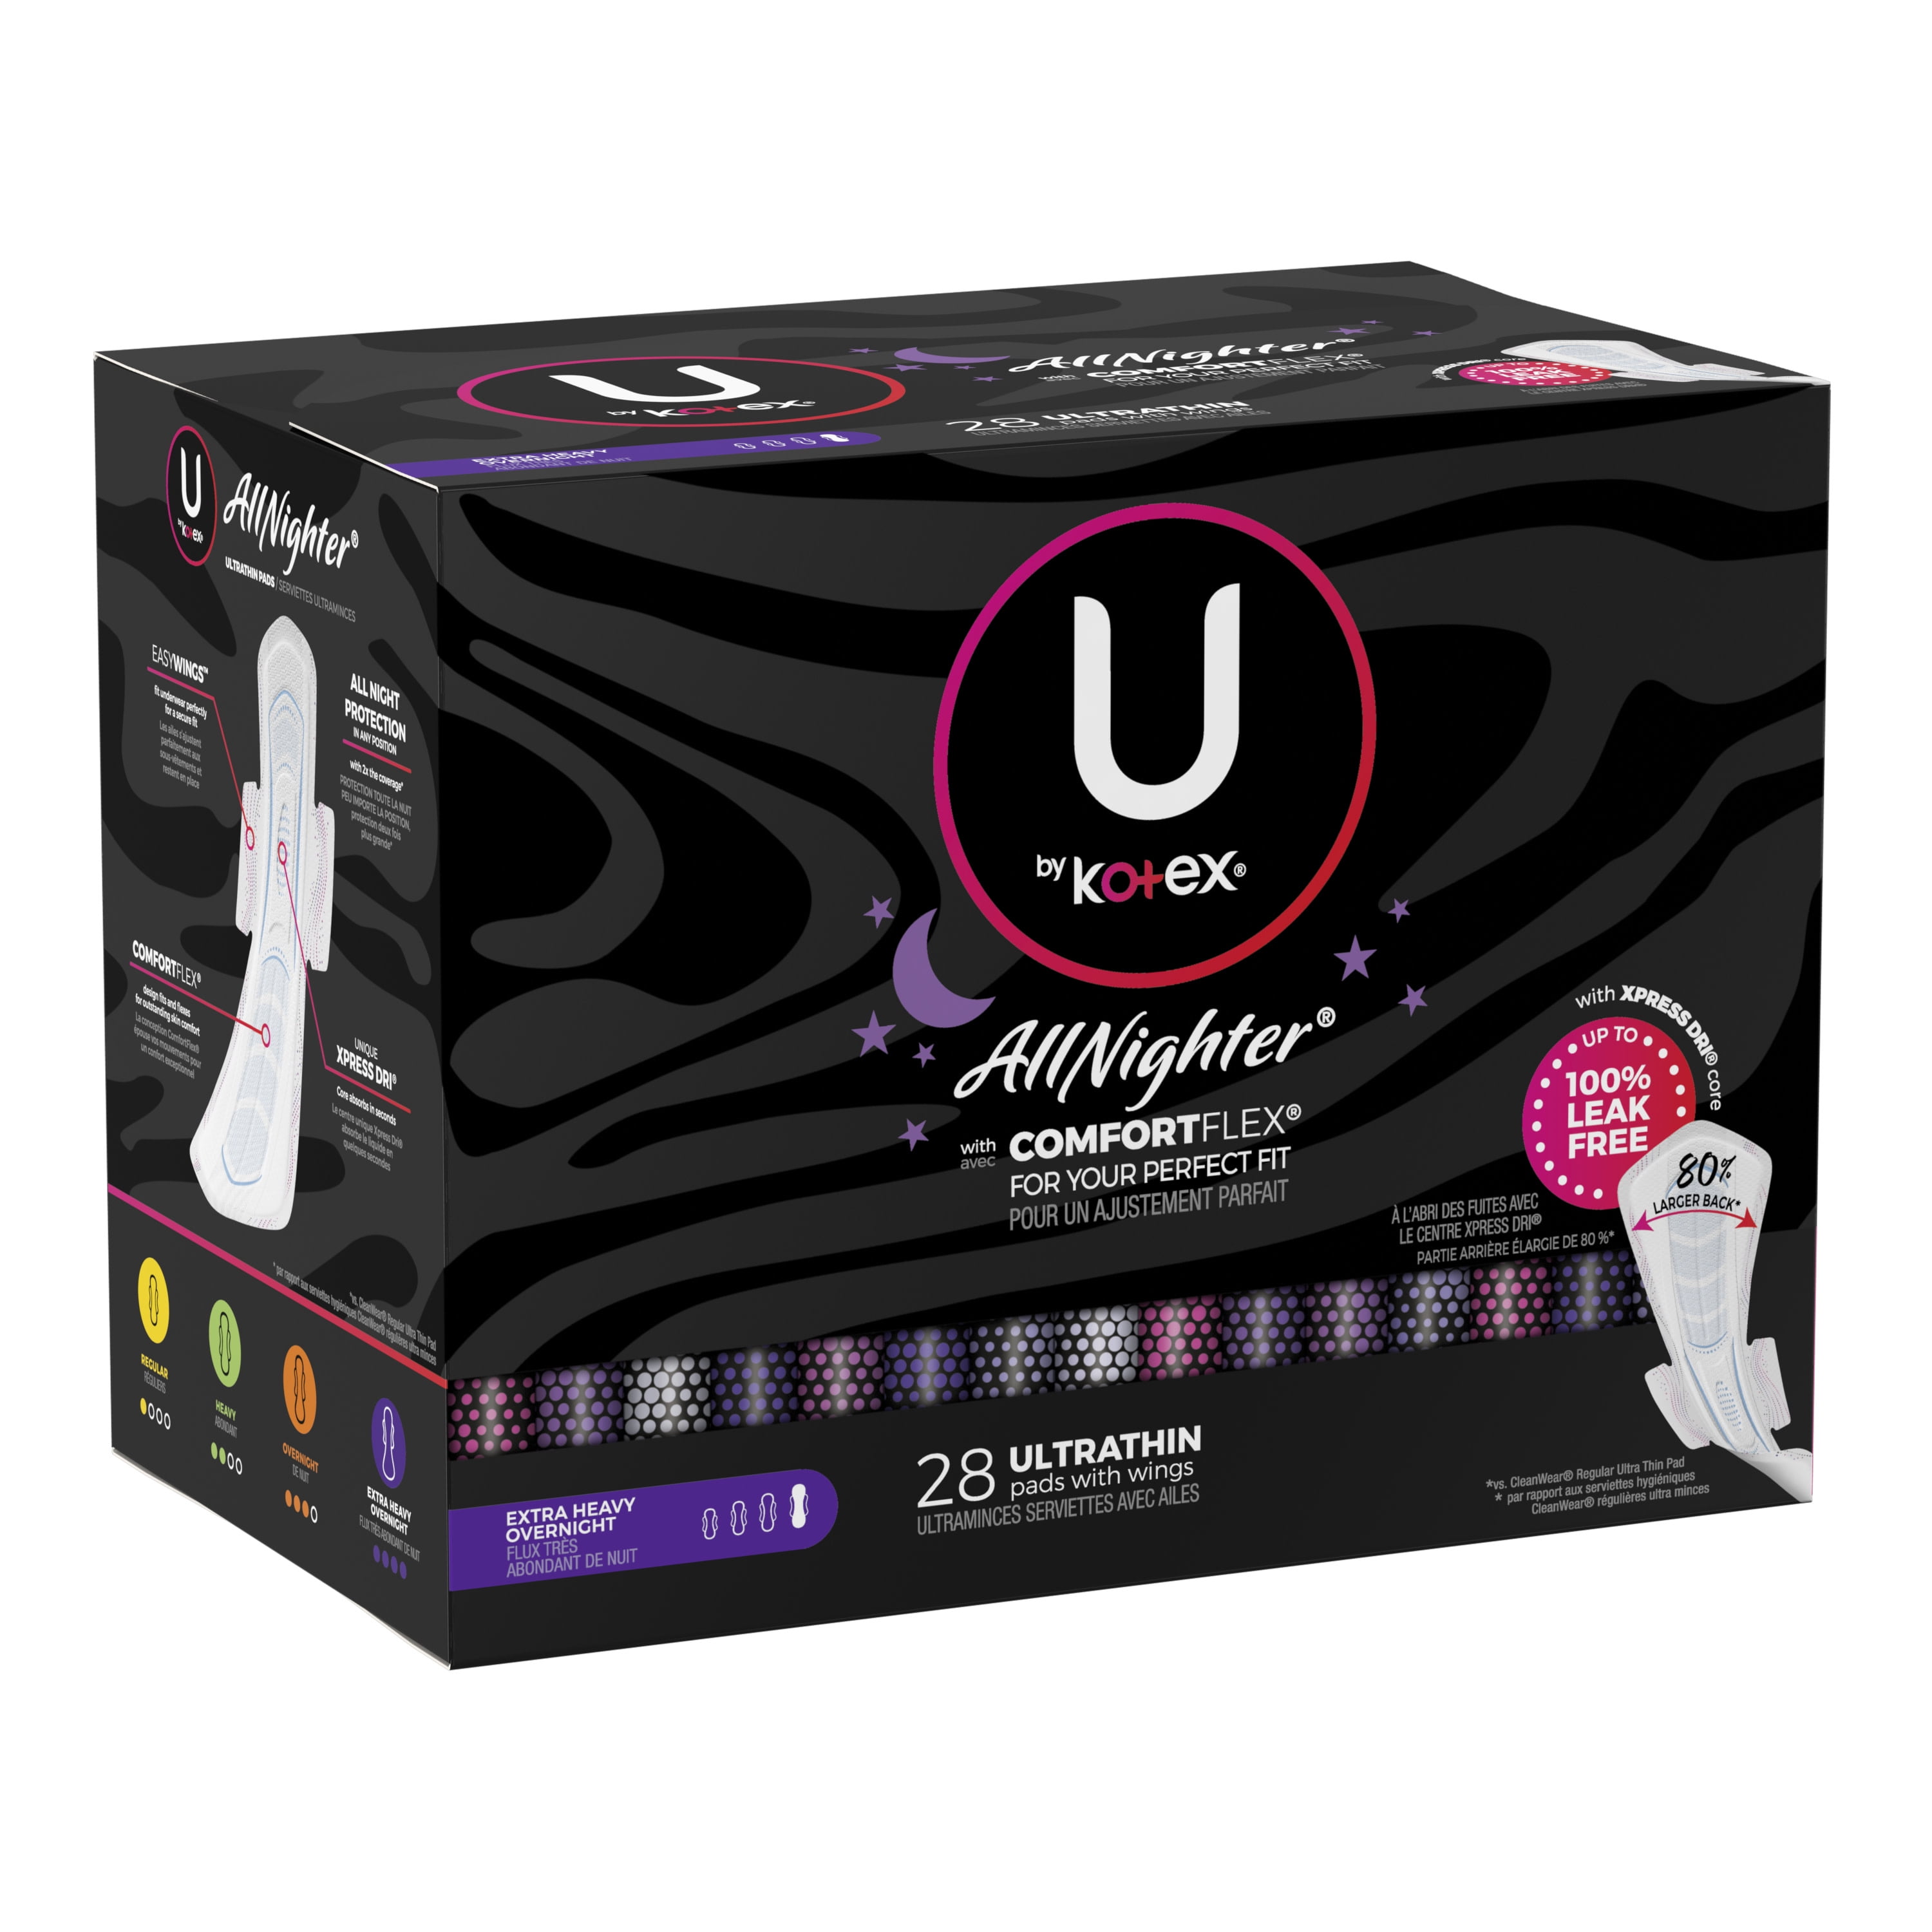 U by Kotex AllNighter Extra Heavy Overnight Pads with Wings, Ultra Thin, 28  Count 